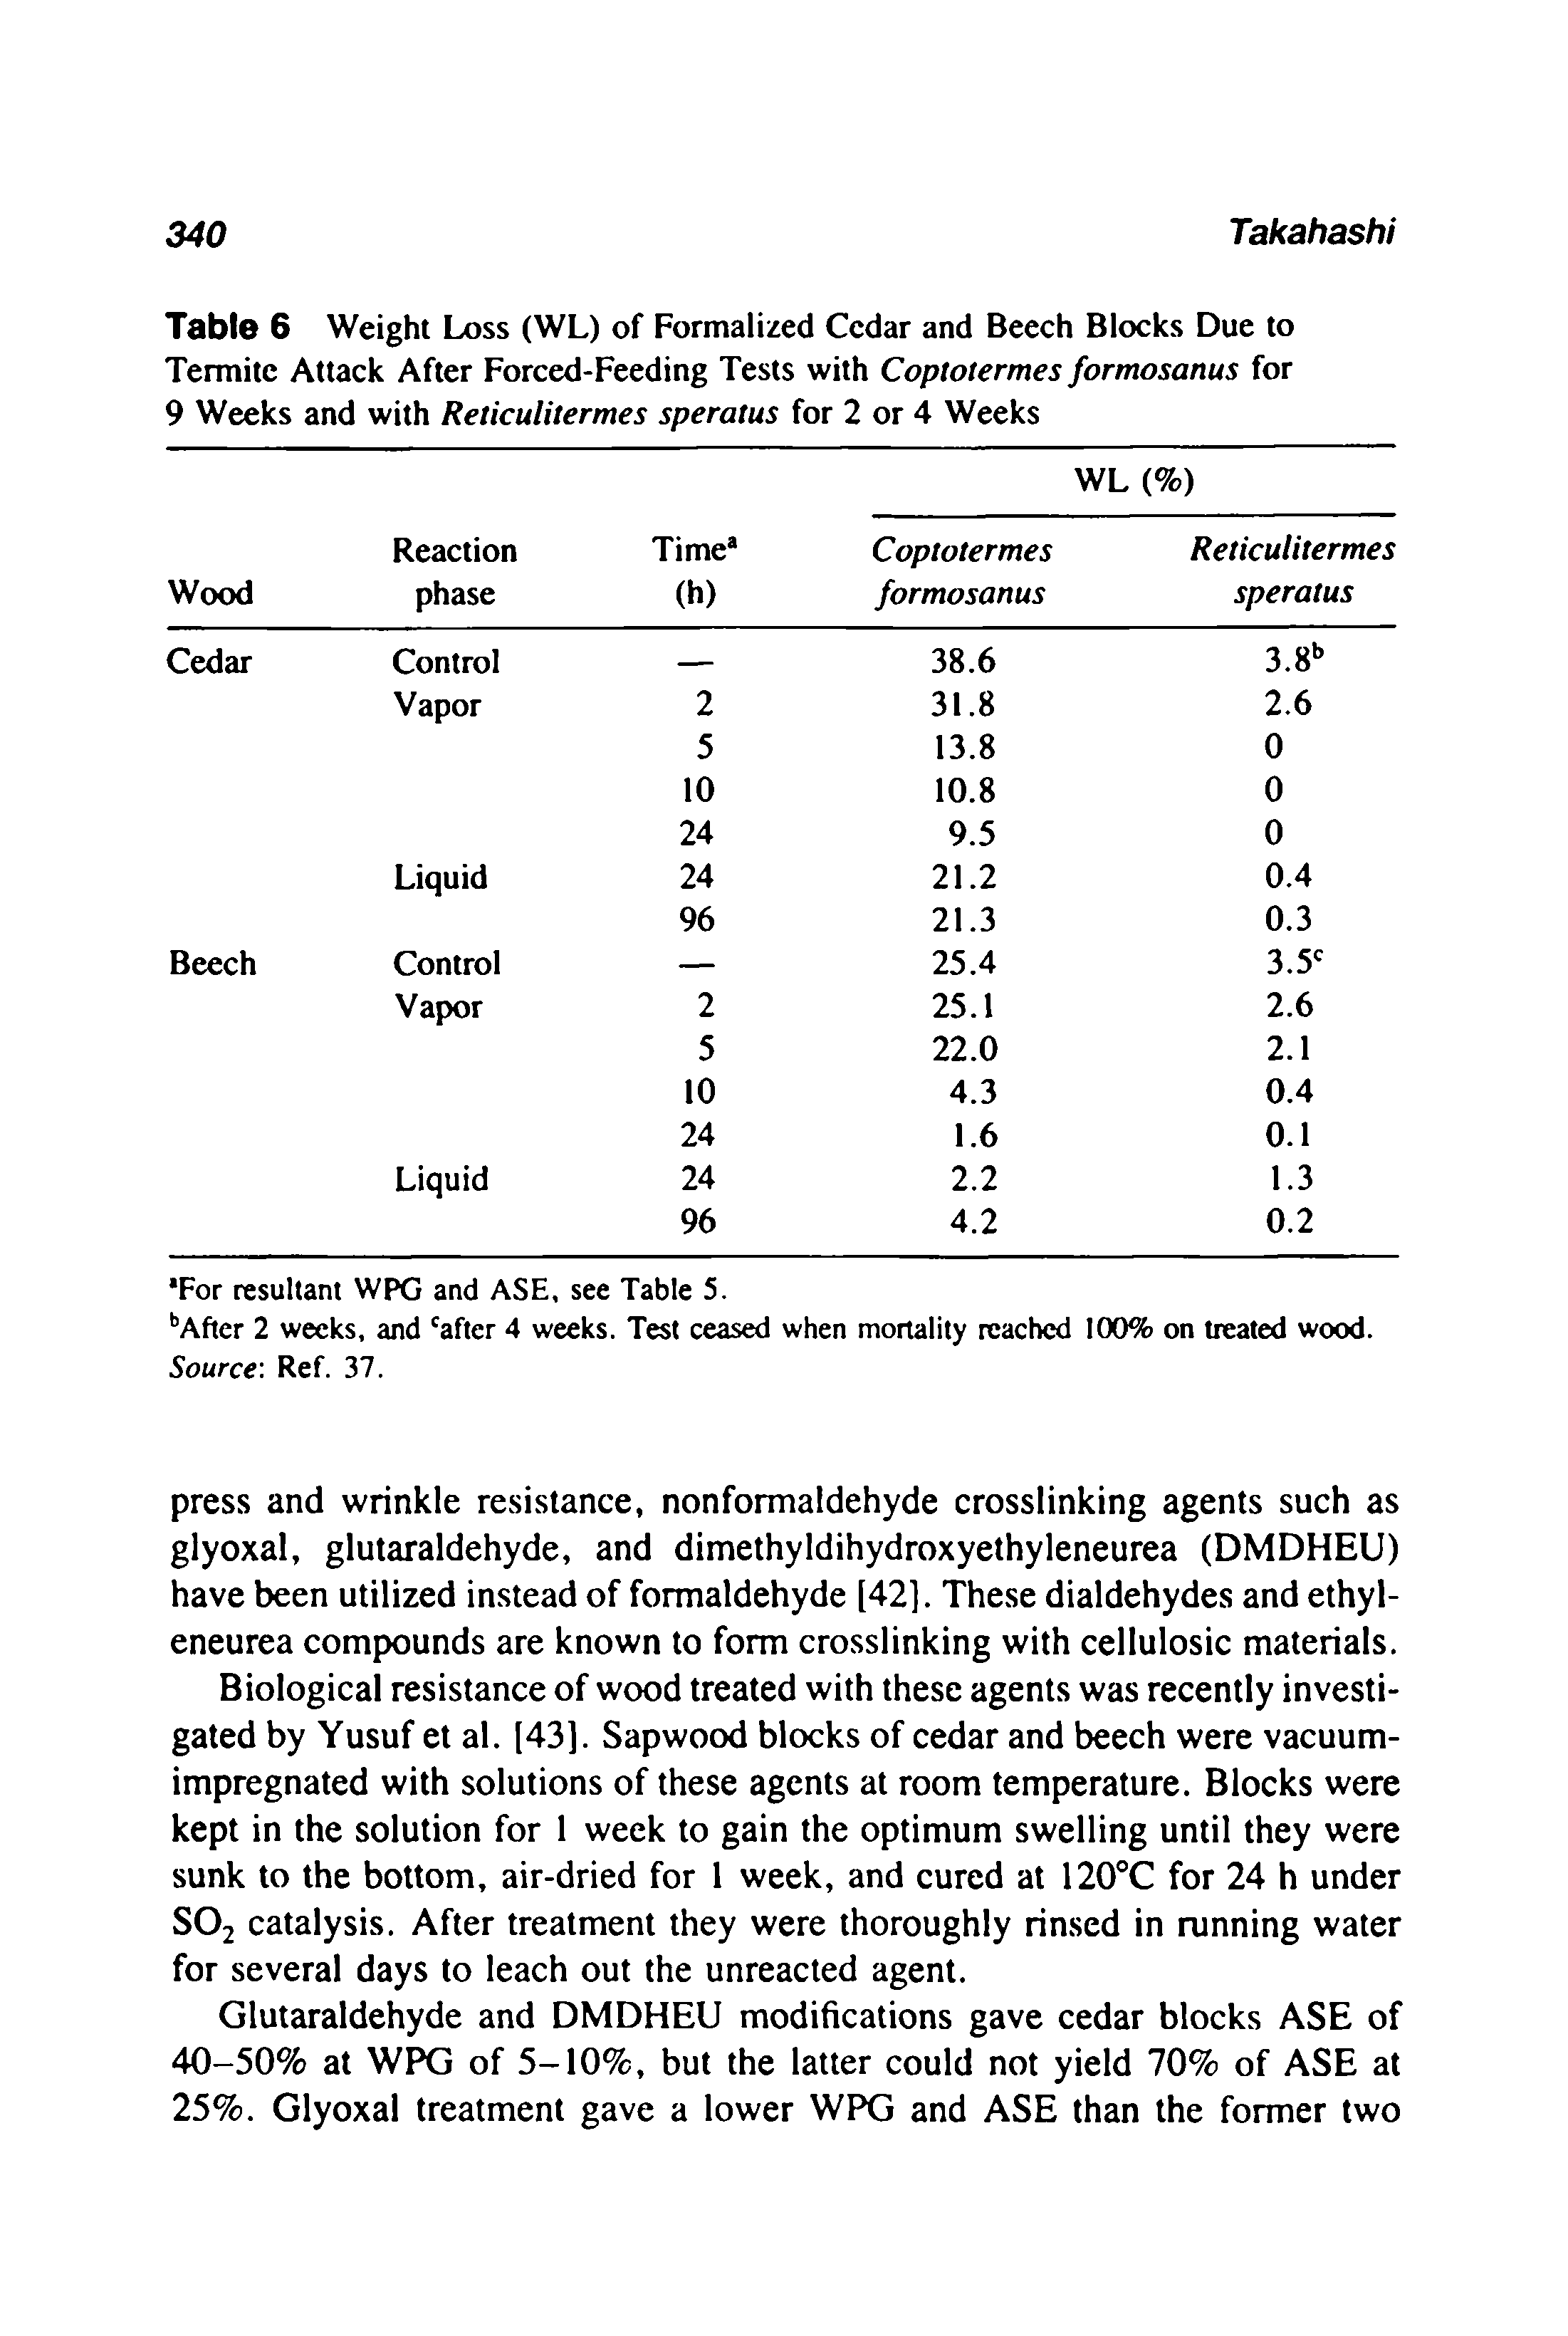 Table 6 Weight Lx)ss (WL) of Formalized Cedar and Beech Blocks Due to Termite Attack After Forced-Feeding Tests with Coptotermes formosams for 9 Weeks and with Reticulitermes speratus for 2 or 4 Weeks...